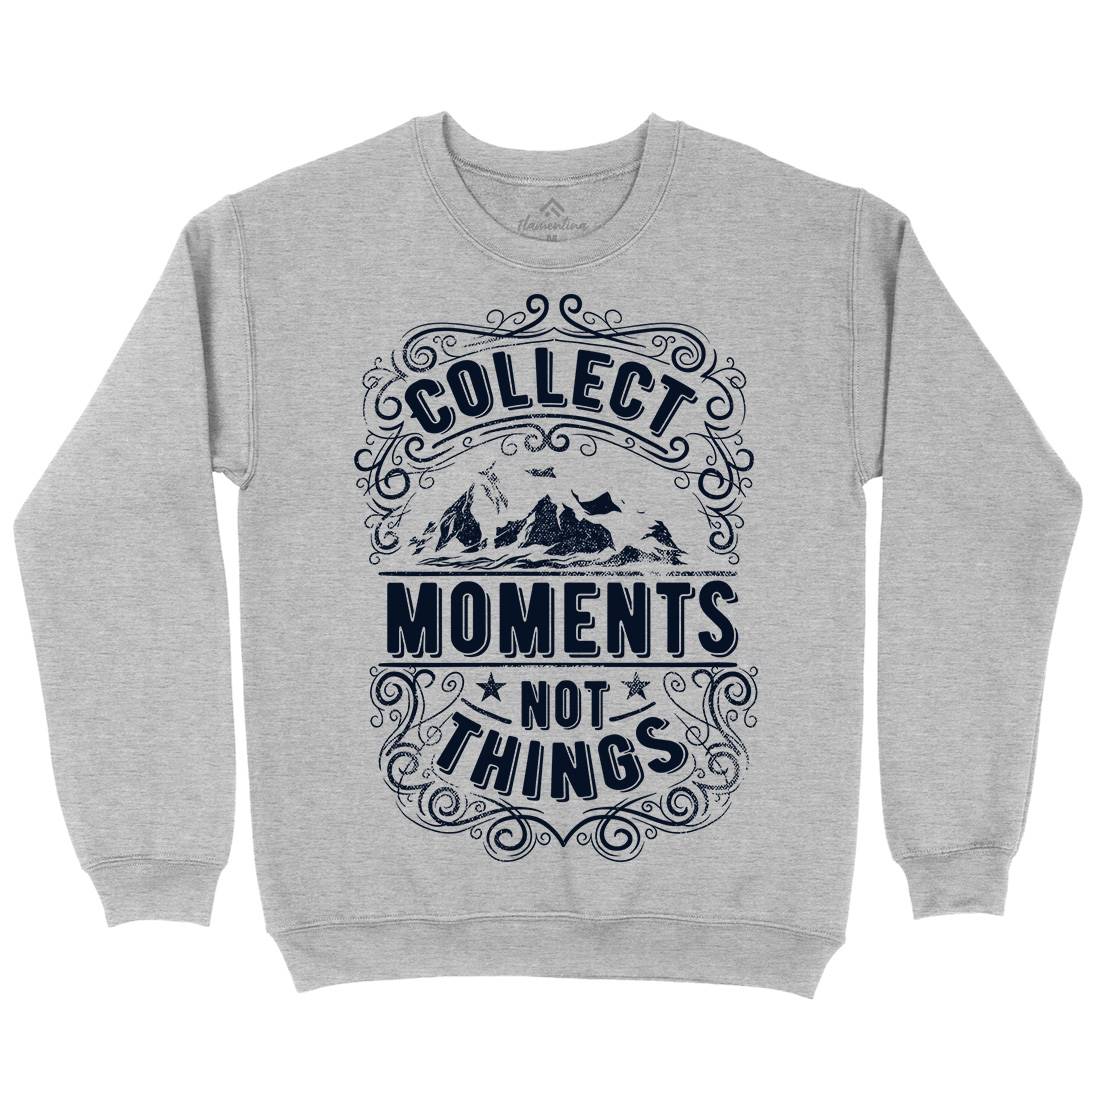 Collect Moments Not Things Kids Crew Neck Sweatshirt Quotes C918